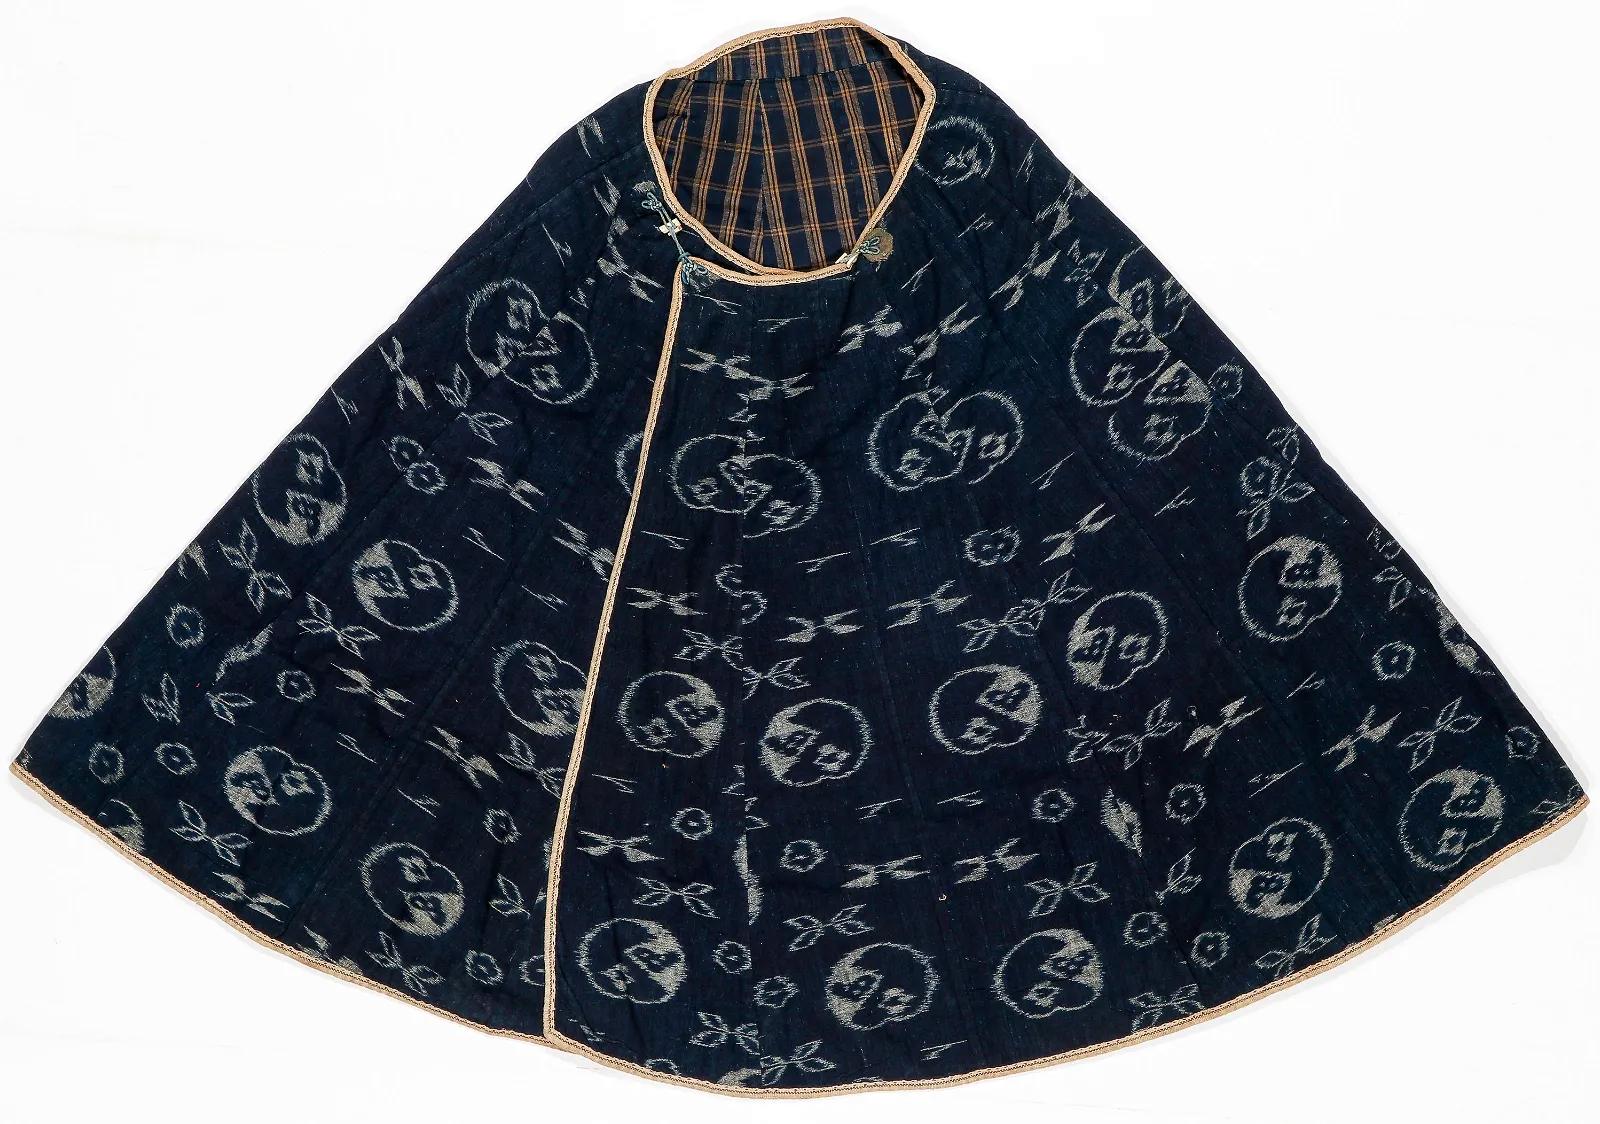 Known in Japanese as Bozugappa (priest's raincoat), this cape-like garment was worn by the travelers in Japan circa late 19th century to early 20th century (end of Meiji period). Derived from the cape worn by the Portuguese missionary, who first